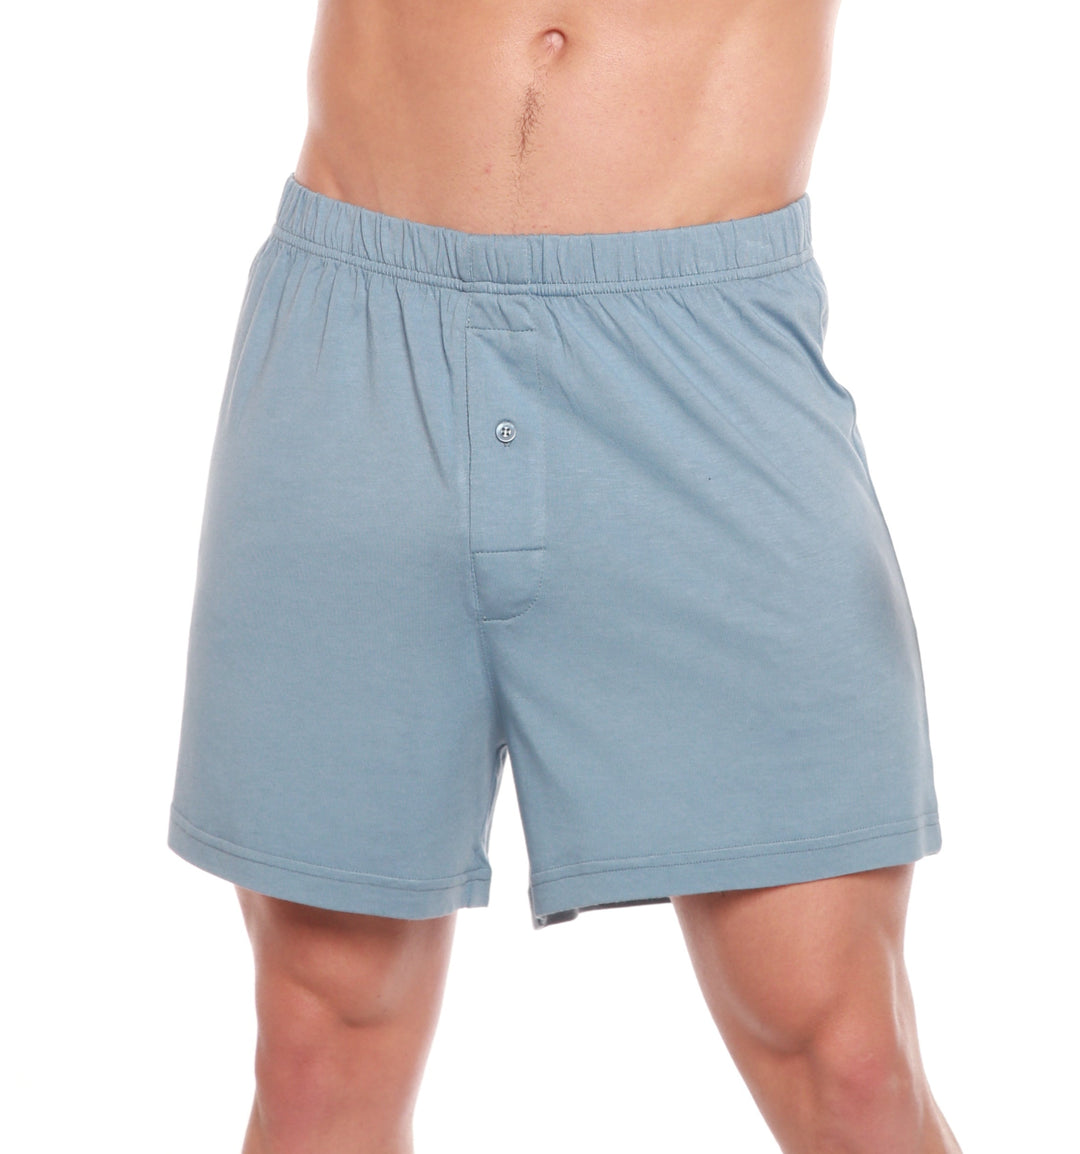 Men's Bamboo Viscose/Cotton Boxer Style Underwear Steel Blue Color - 3-pack